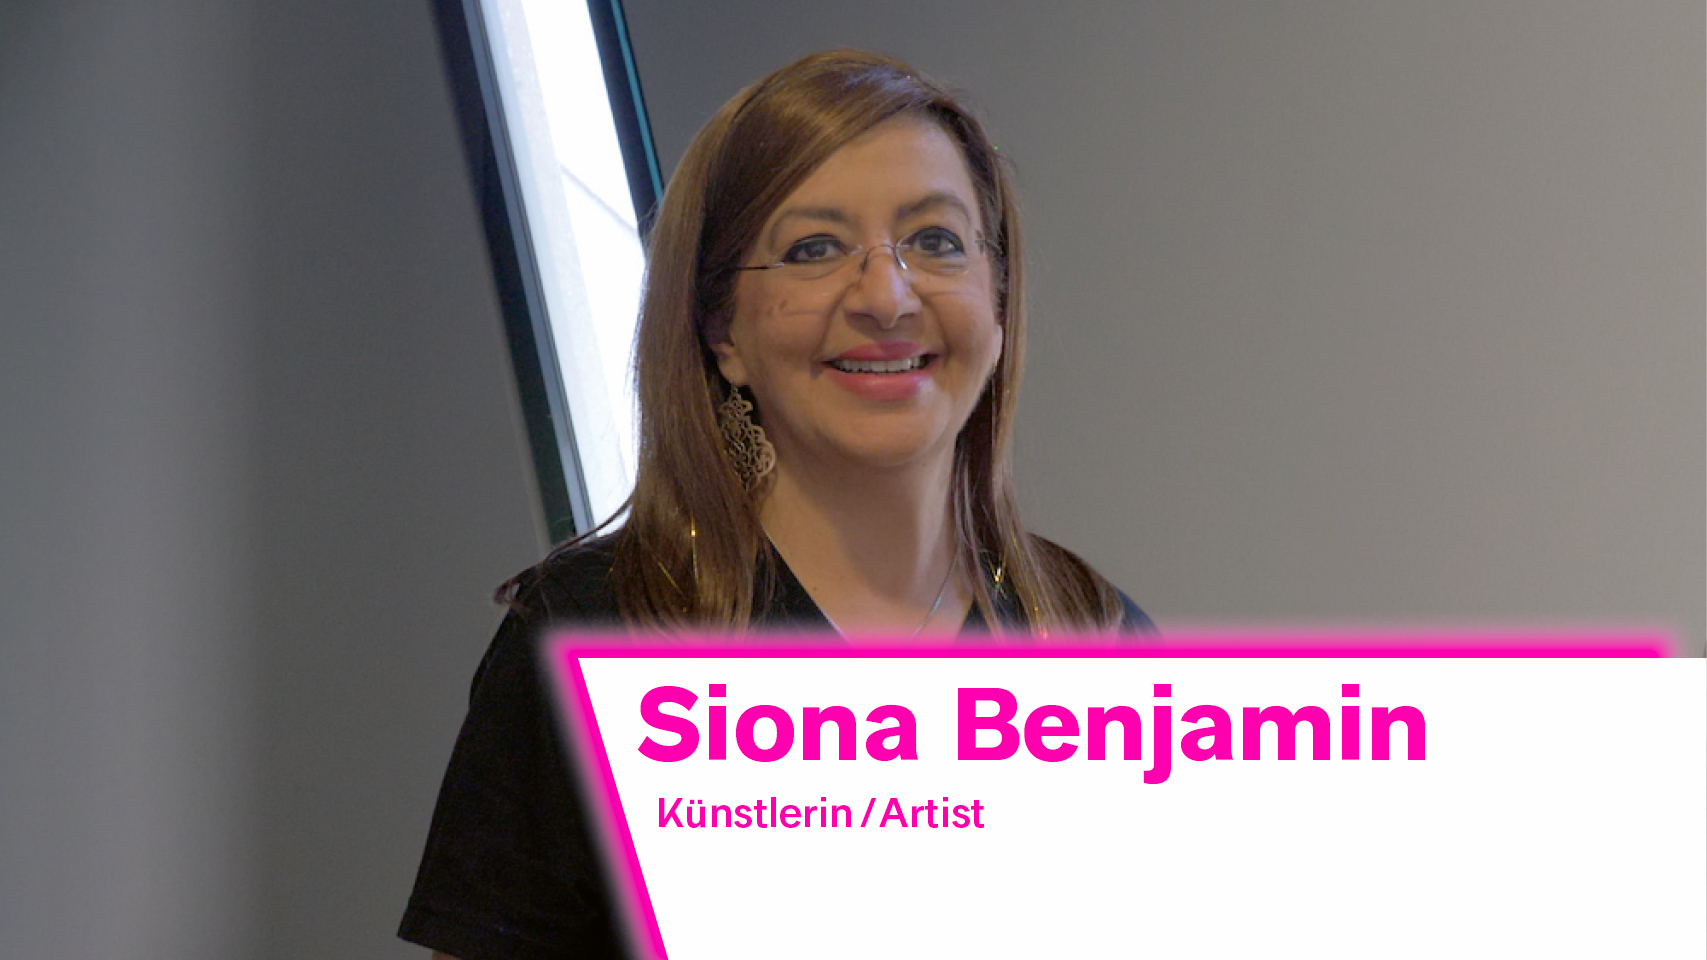 The image shows a portrait of artist Siona Bemjamin.